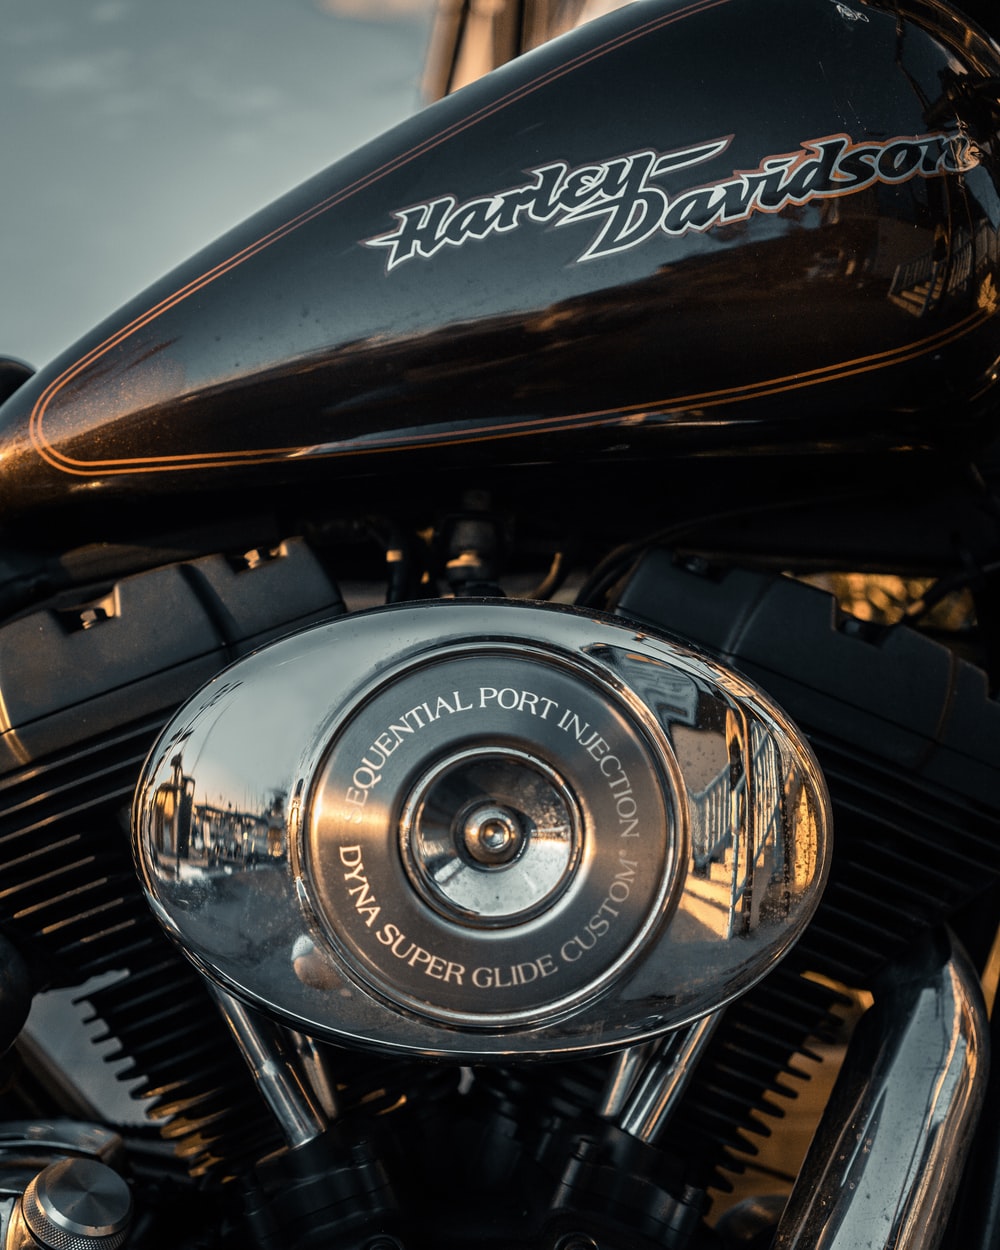 Harley Davidson Motorcycle Pictures Free